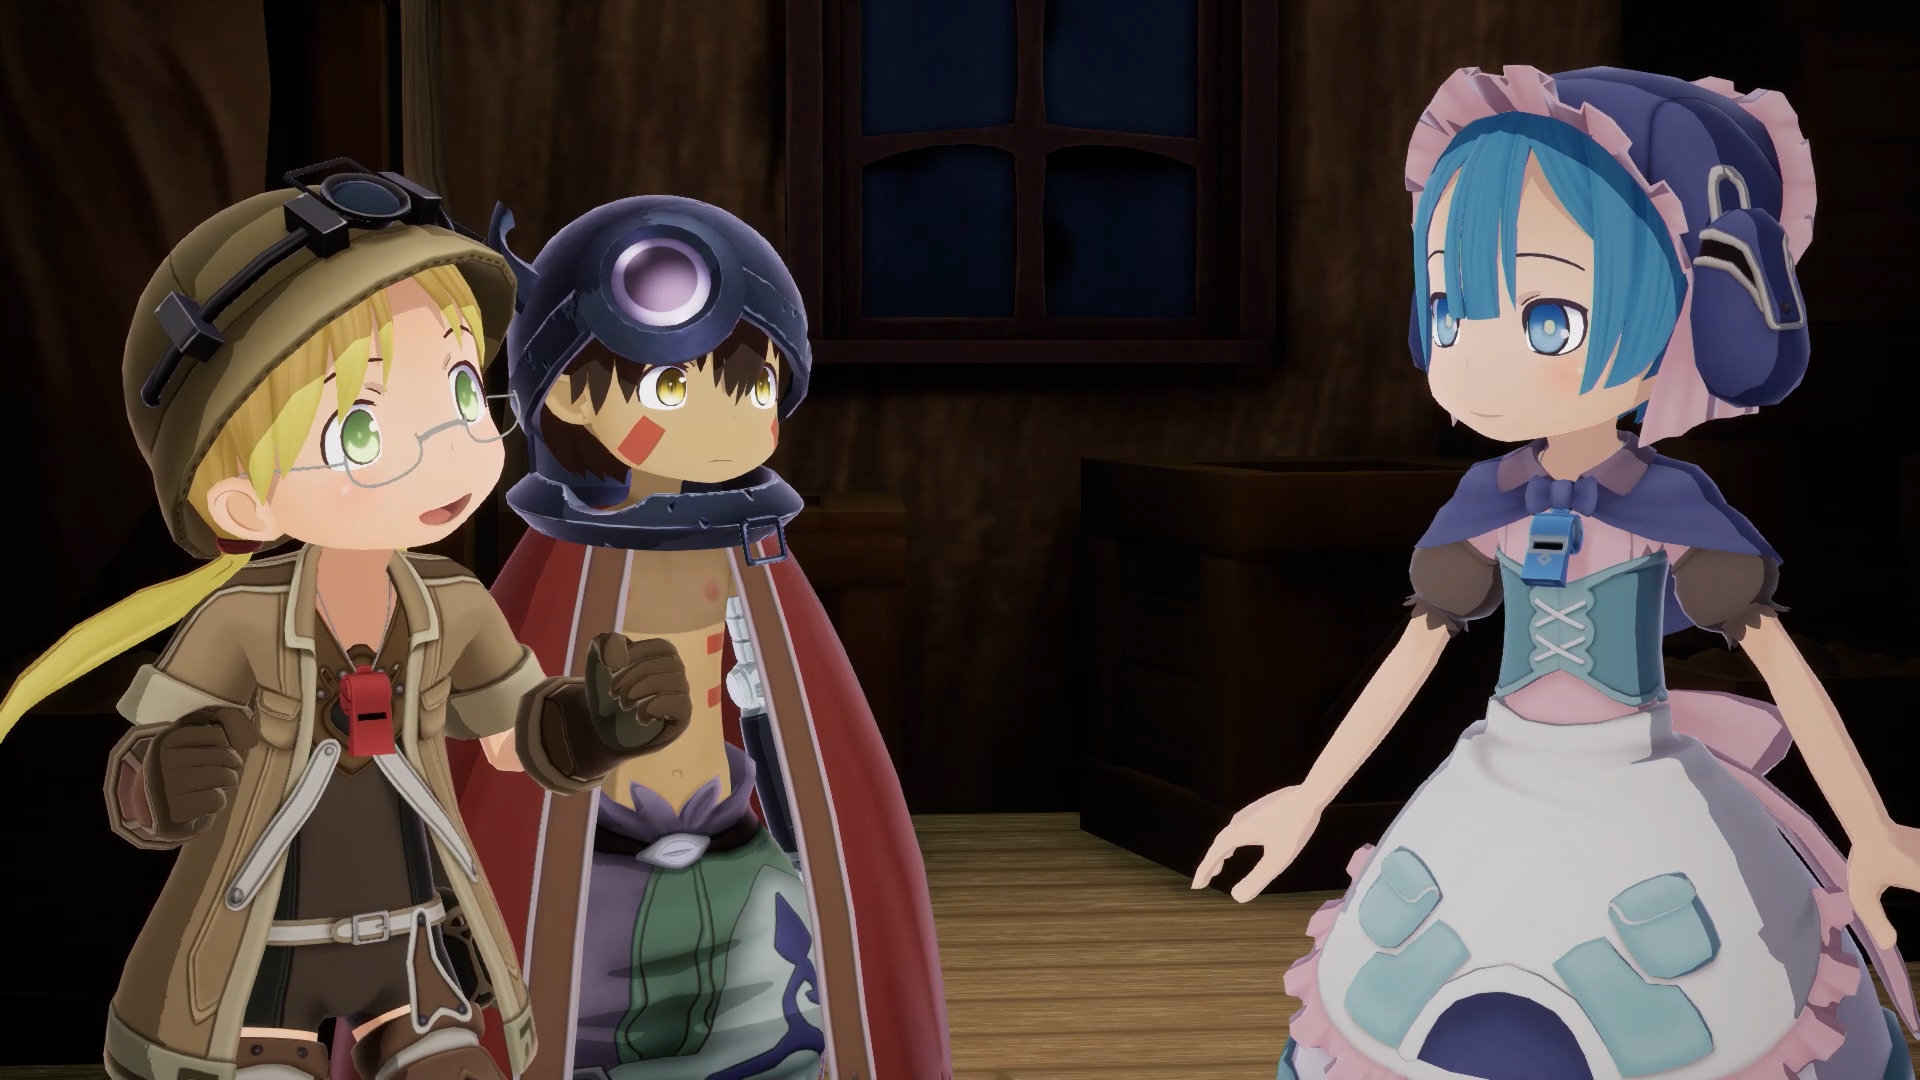 Made in Abyss: Binary Star Falling into Darkness - Numskull Games